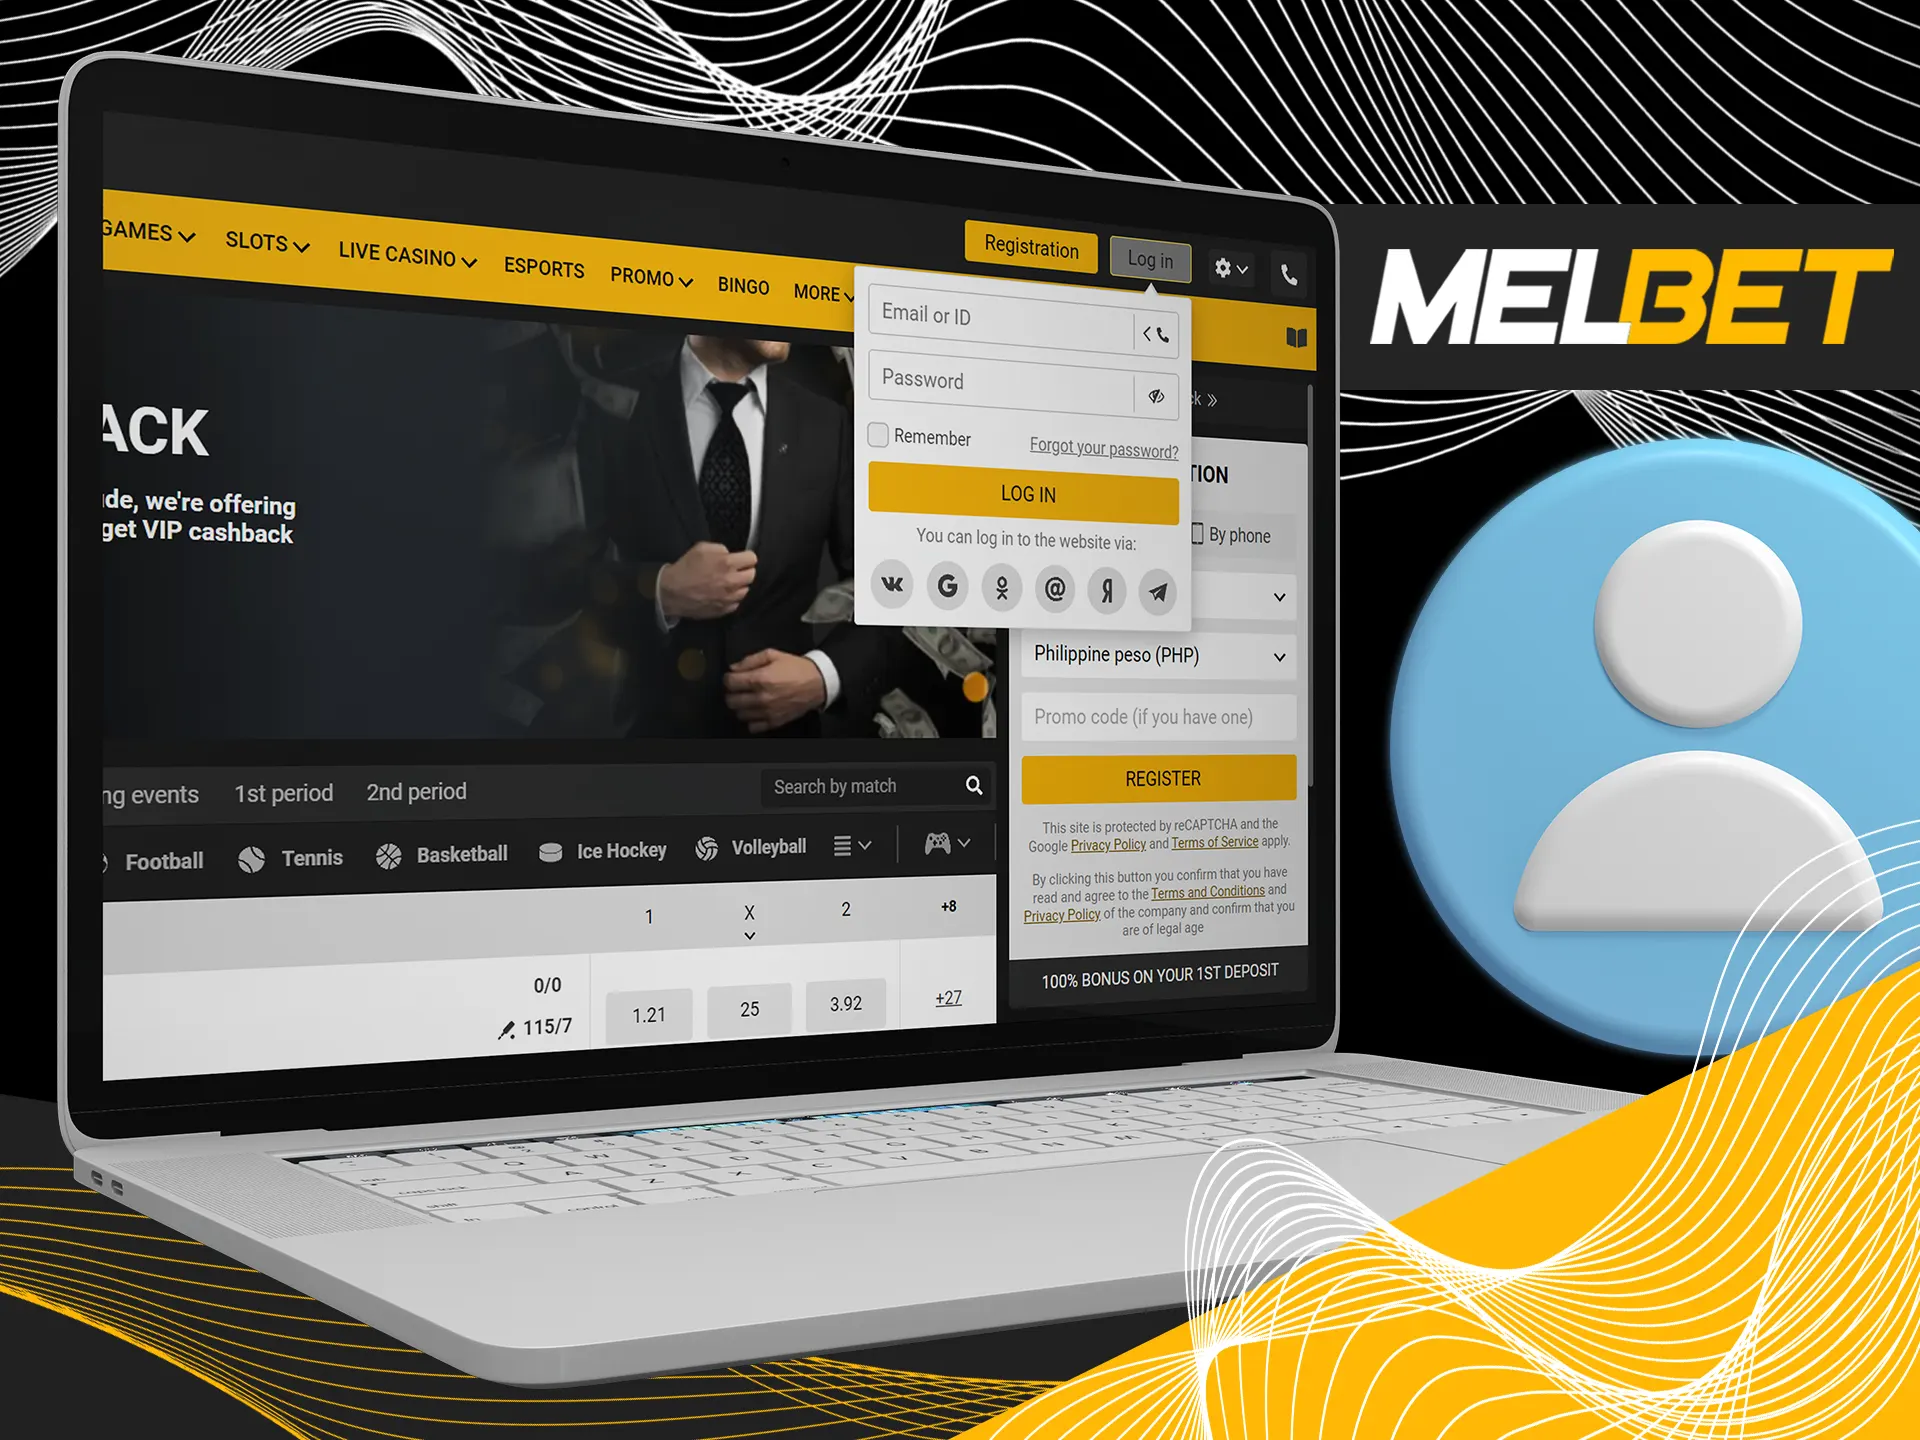 Login to Melbet for getting access to all of the features.